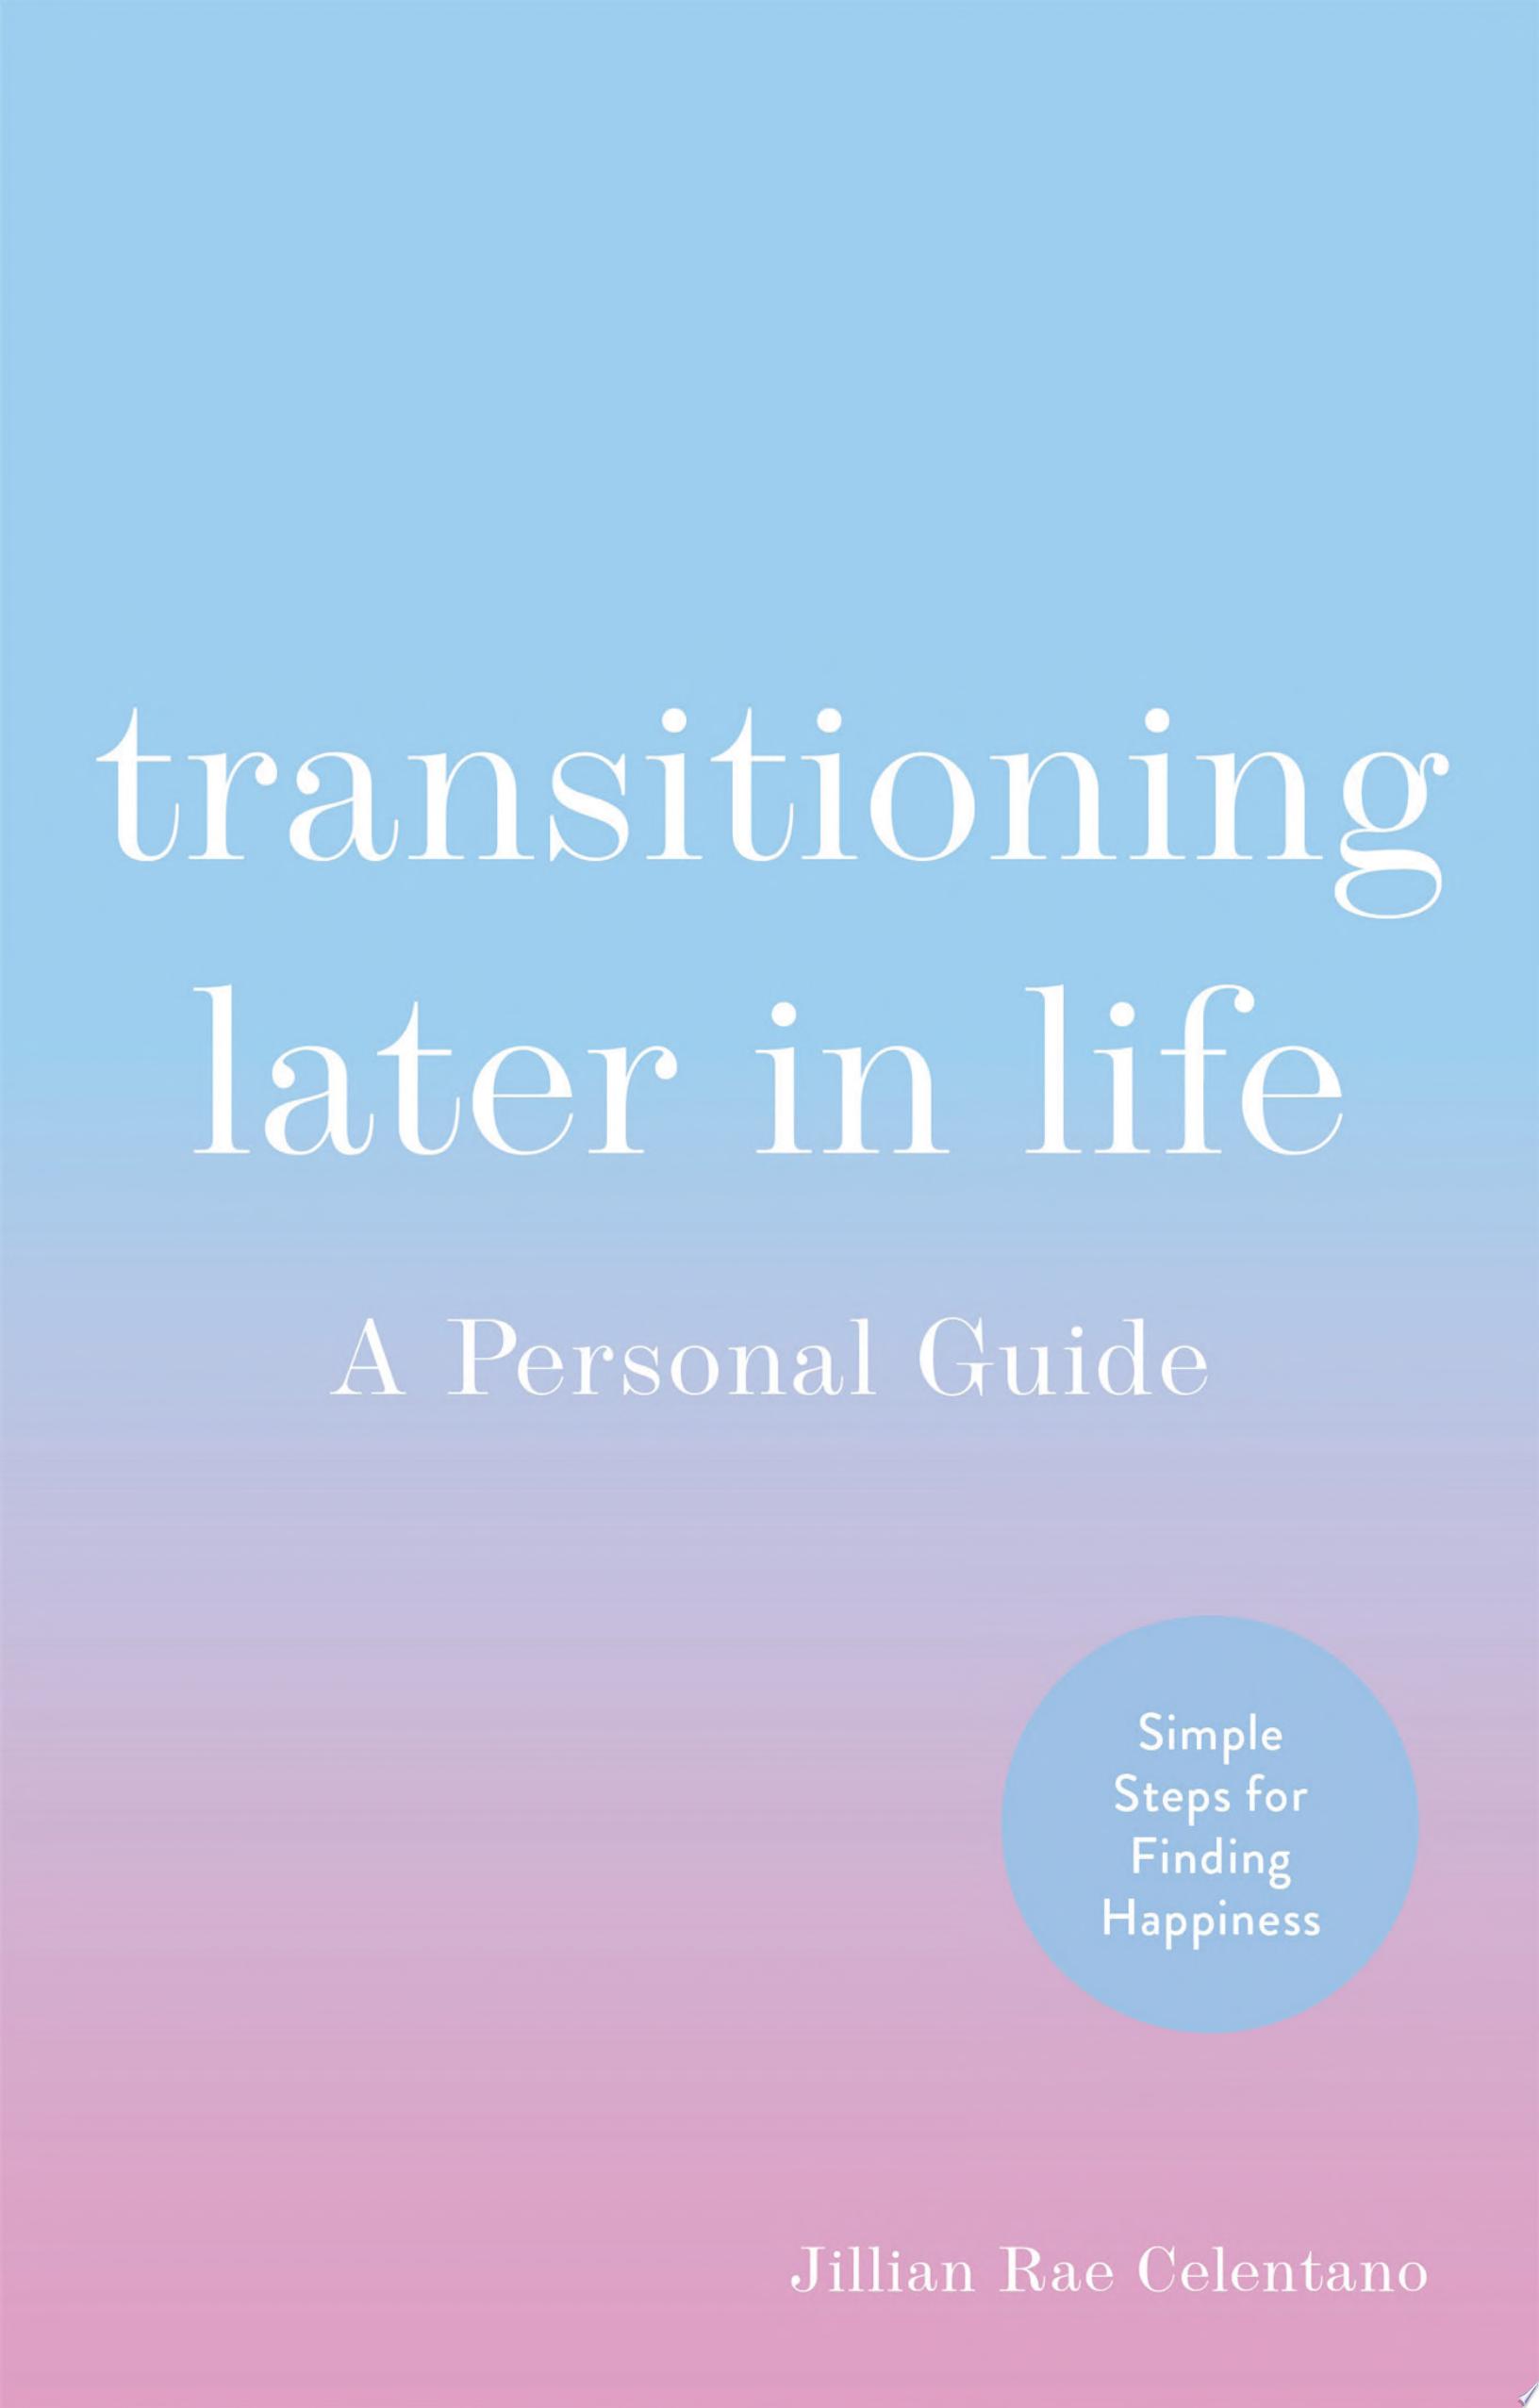 Image for "Transitioning Later in Life"